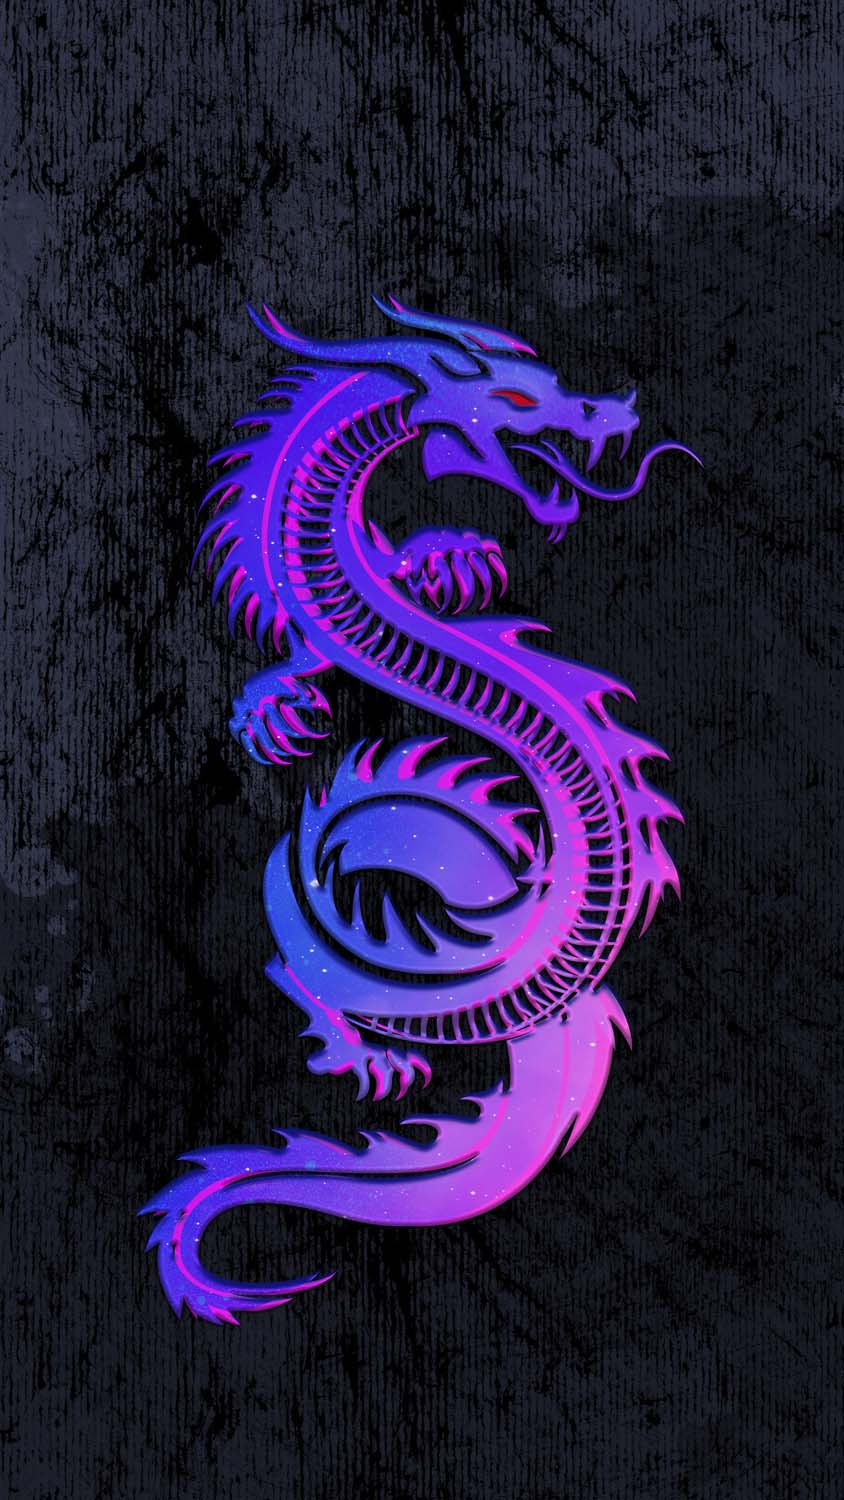 Black Dragon Art Wallpapers  Black Dragon Wallpapers for iPhone